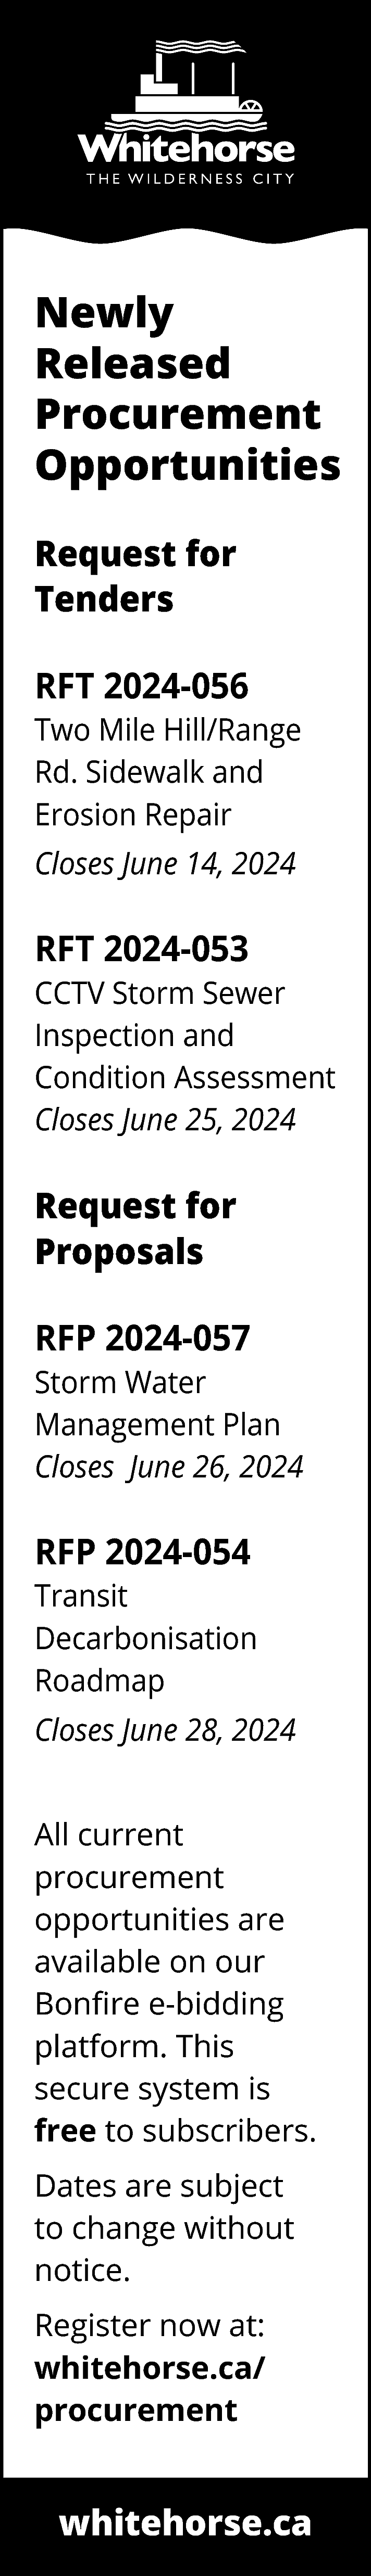 Newly <br>Released <br>Procurement <br>Opportunities <br>Request  Newly  Released  Procurement  Opportunities  Request for  Tenders  RFT 2024-056  Two Mile Hill/Range  Rd. Sidewalk and  Erosion Repair  Closes June 14, 2024    RFT 2024-053  CCTV Storm Sewer  Inspection and  Condition Assessment  Closes June 25, 2024    Request for  Proposals  RFP 2024-057  Storm Water  Management Plan  Closes June 26, 2024    RFP 2024-054  Transit  Decarbonisation  Roadmap  Closes June 28, 2024  All current  procurement  opportunities are  available on our  Bonfire e-bidding  platform. This  secure system is  free to subscribers.  Dates are subject  to change without  notice.  Register now at:  whitehorse.ca/  procurement    whitehorse.ca    